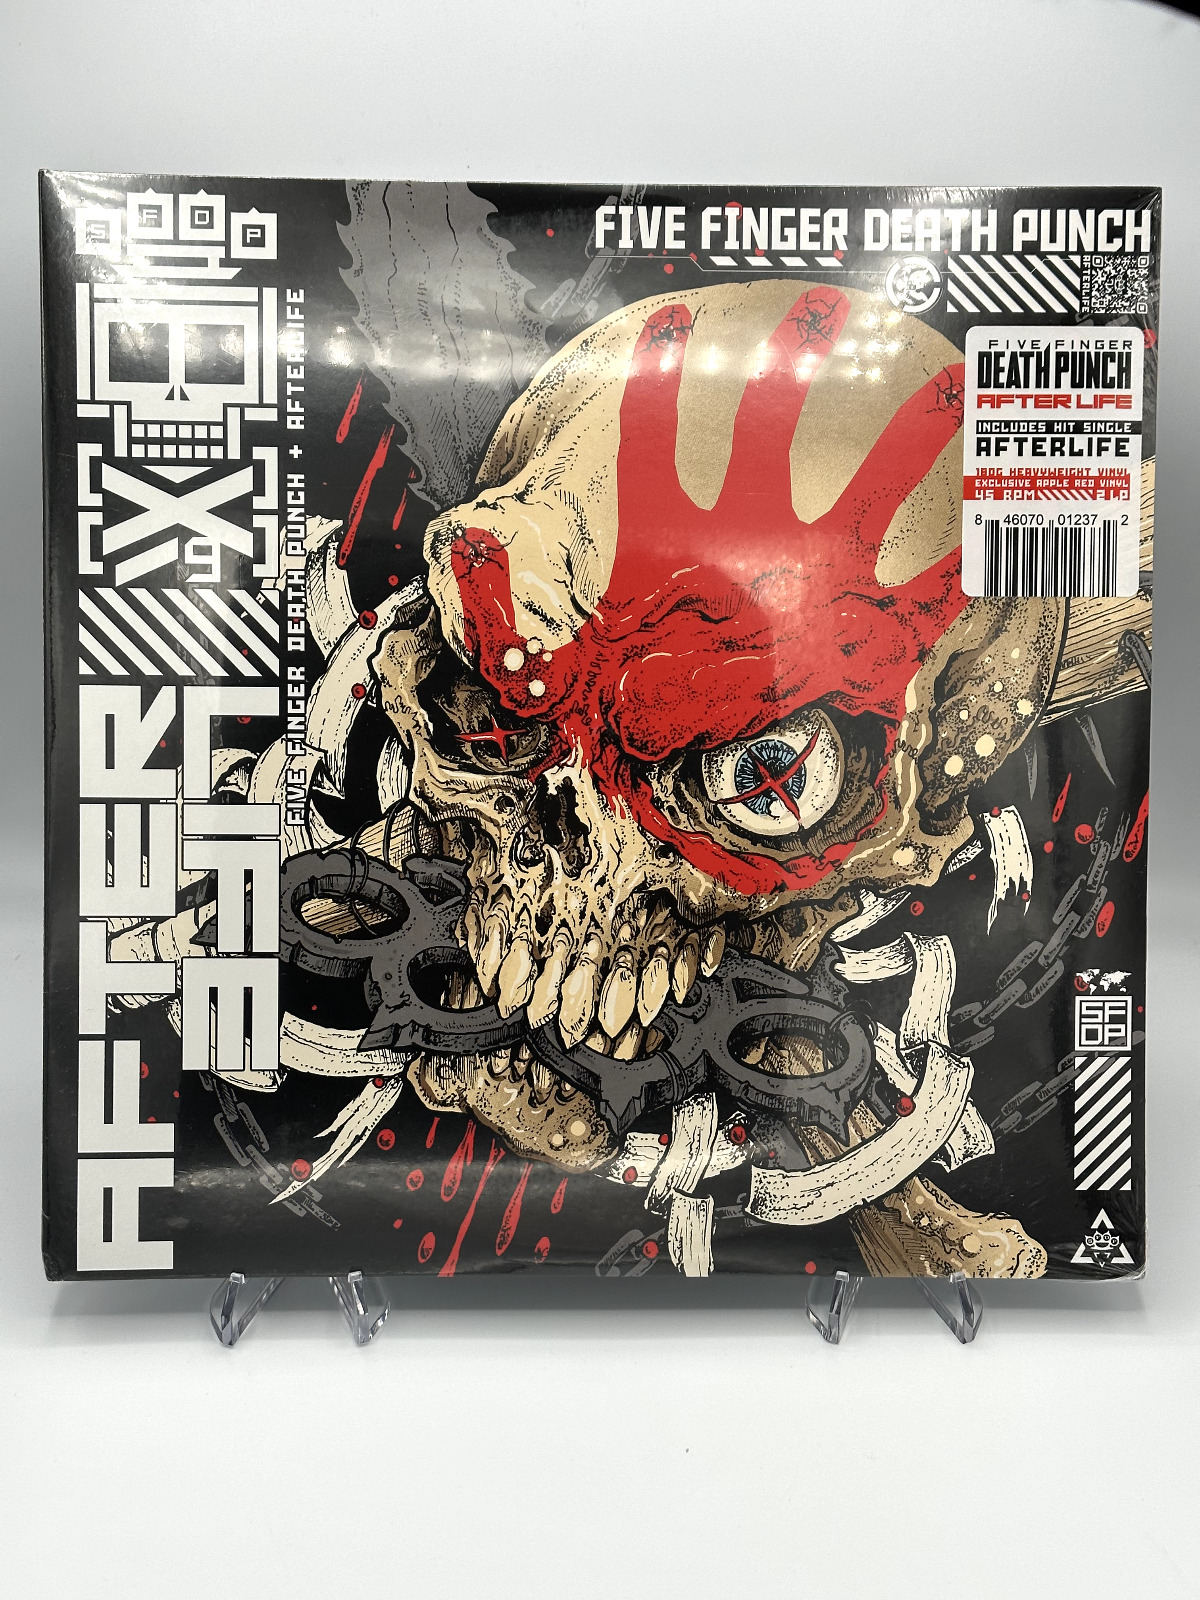 Five Finger Death Punch 5FDP Afterlife Exclusive Apple Red 2LP Vinyl Record